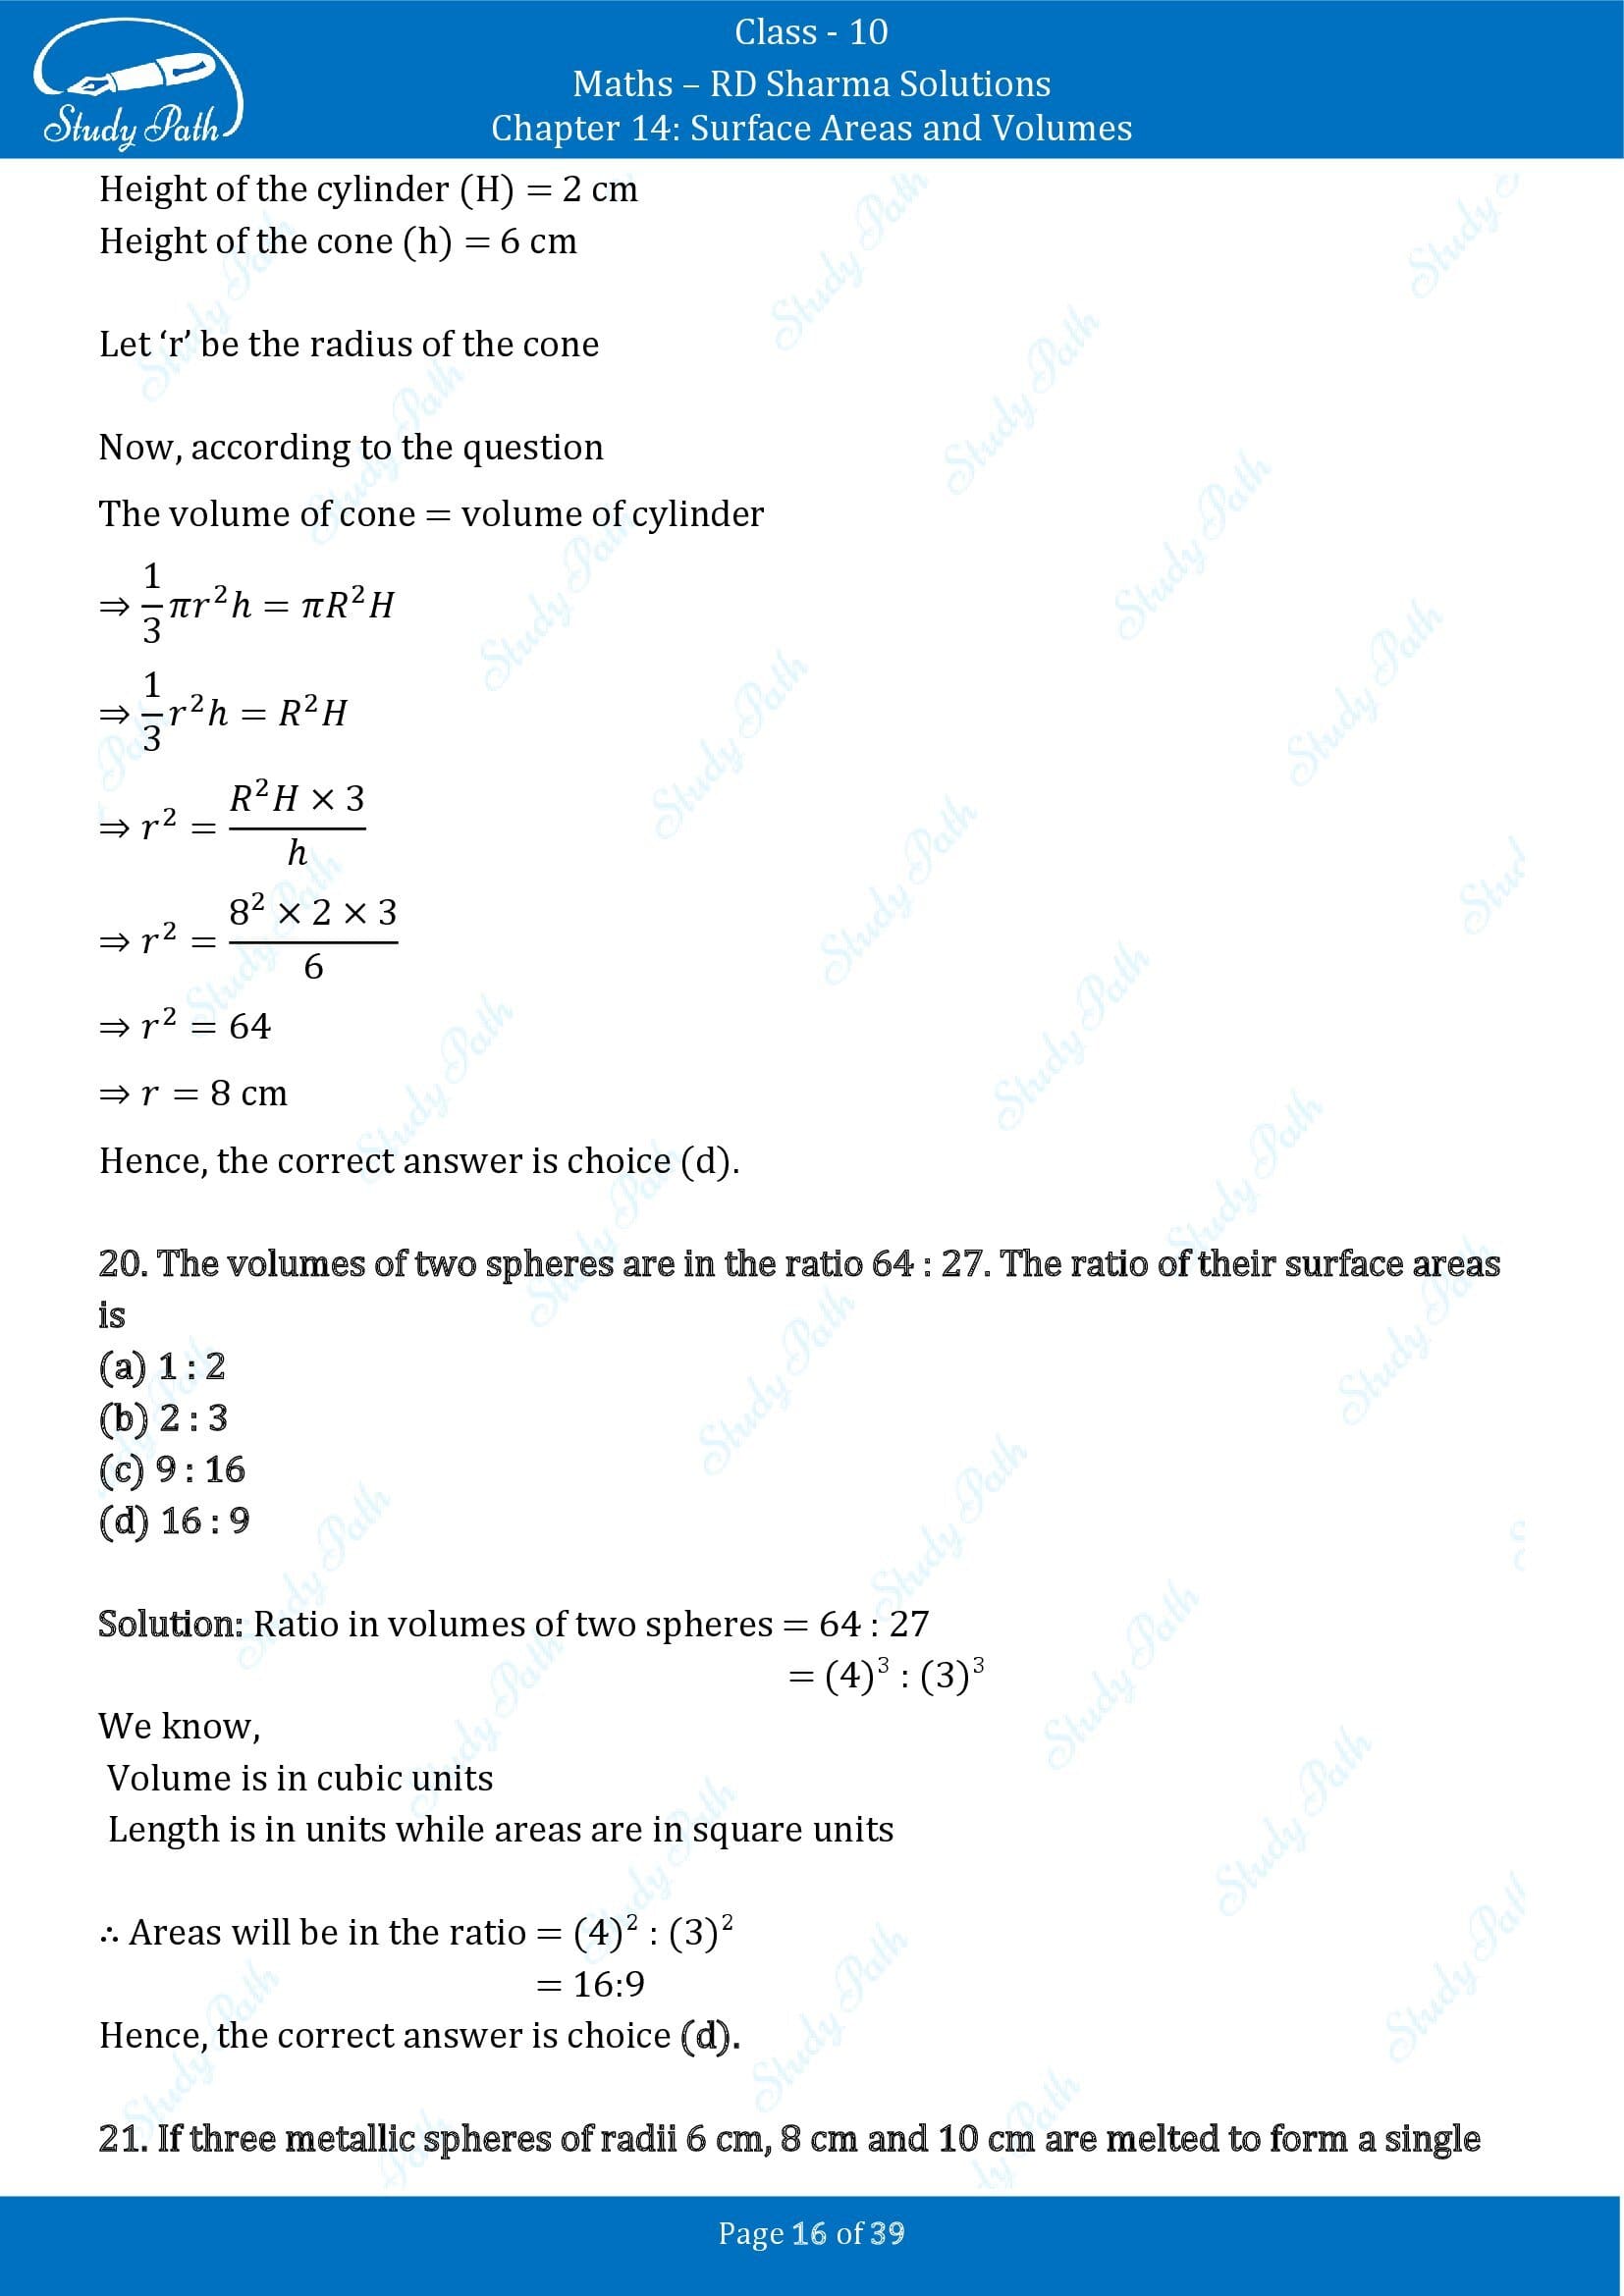 RD Sharma Solutions Class 10 Chapter 14 Surface Areas and Volumes Multiple Choice Question MCQs 00016